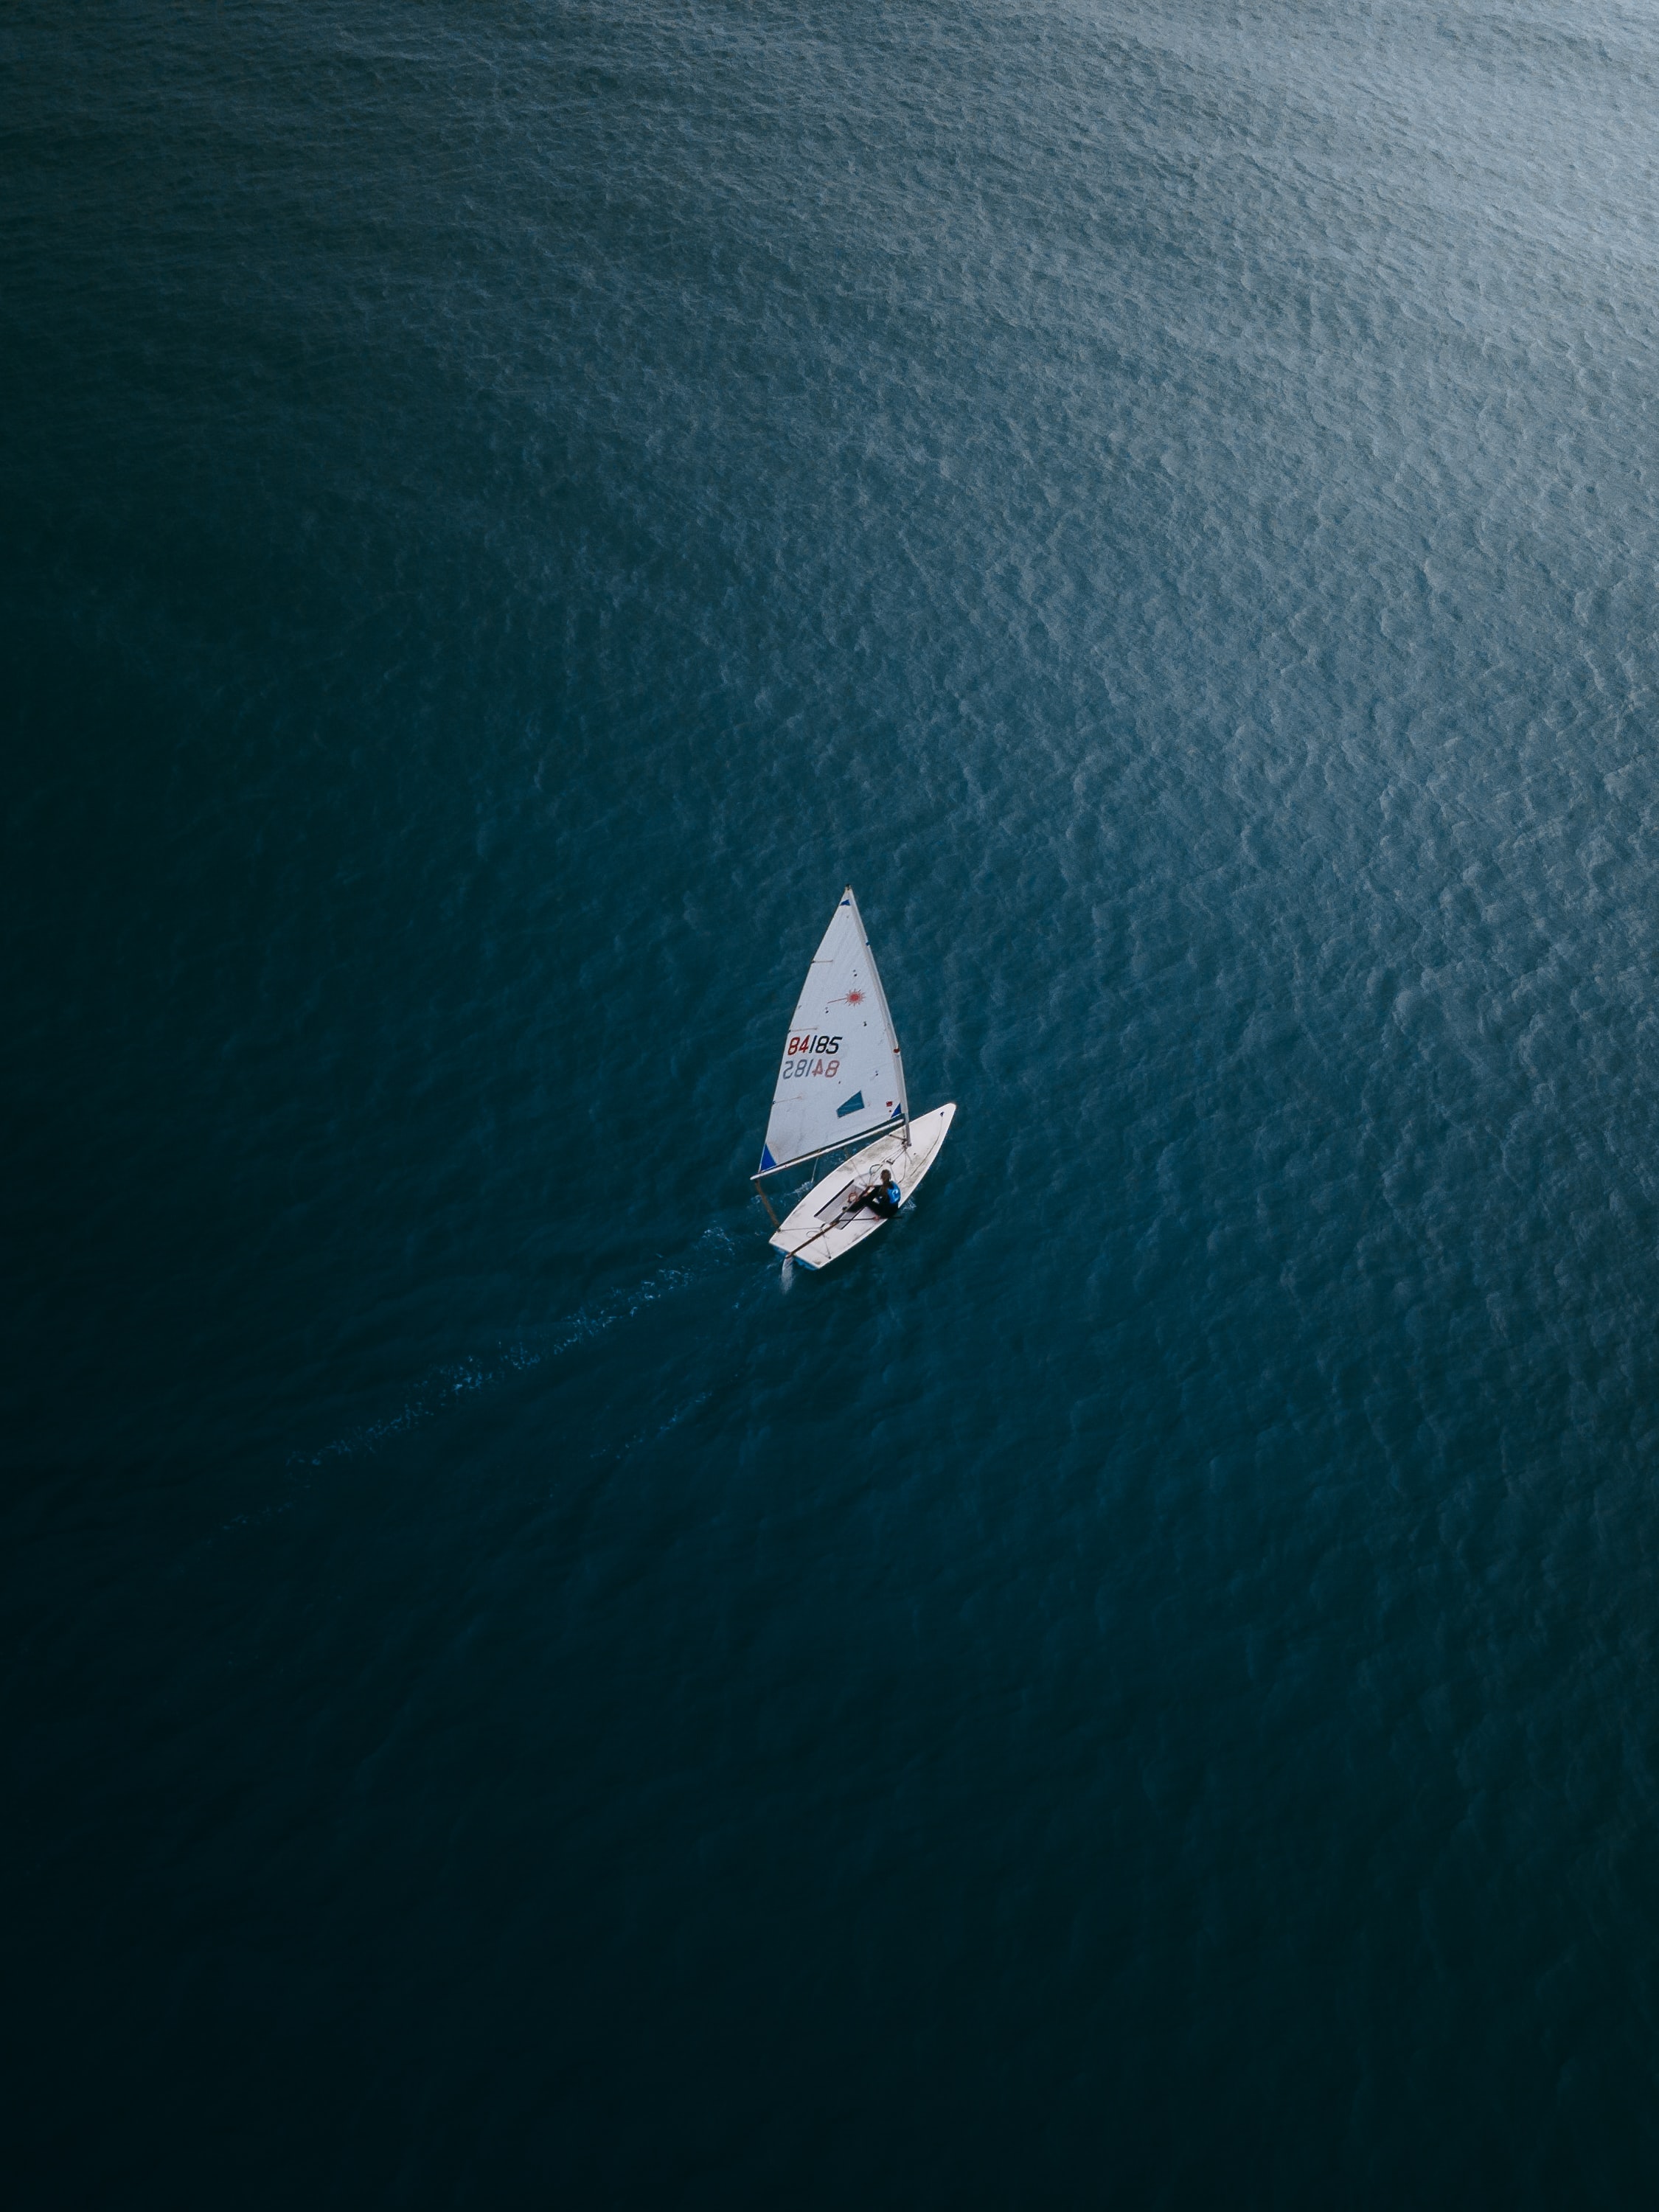 sea, boat, loneliness, water, view from above, miscellanea, miscellaneous QHD